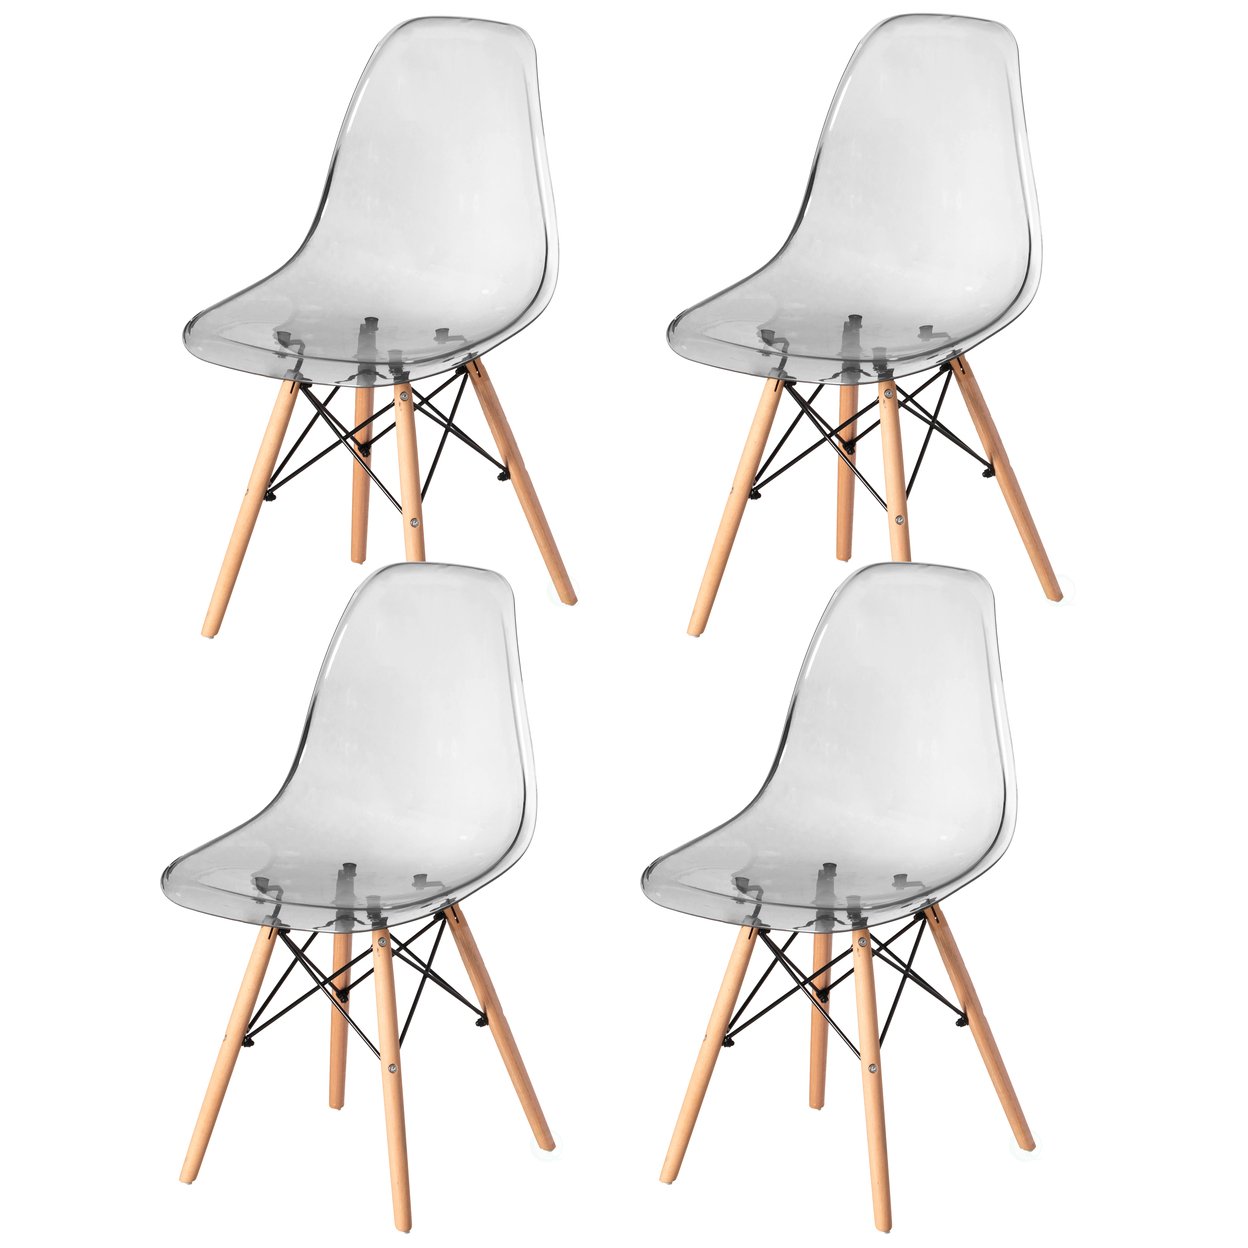 Mid-Century Modern Style Dining Chair With Wooden Dowel Eiffel Legs, DSW Transparent Plastic Shell Accent Chair - Gray Set Of 4